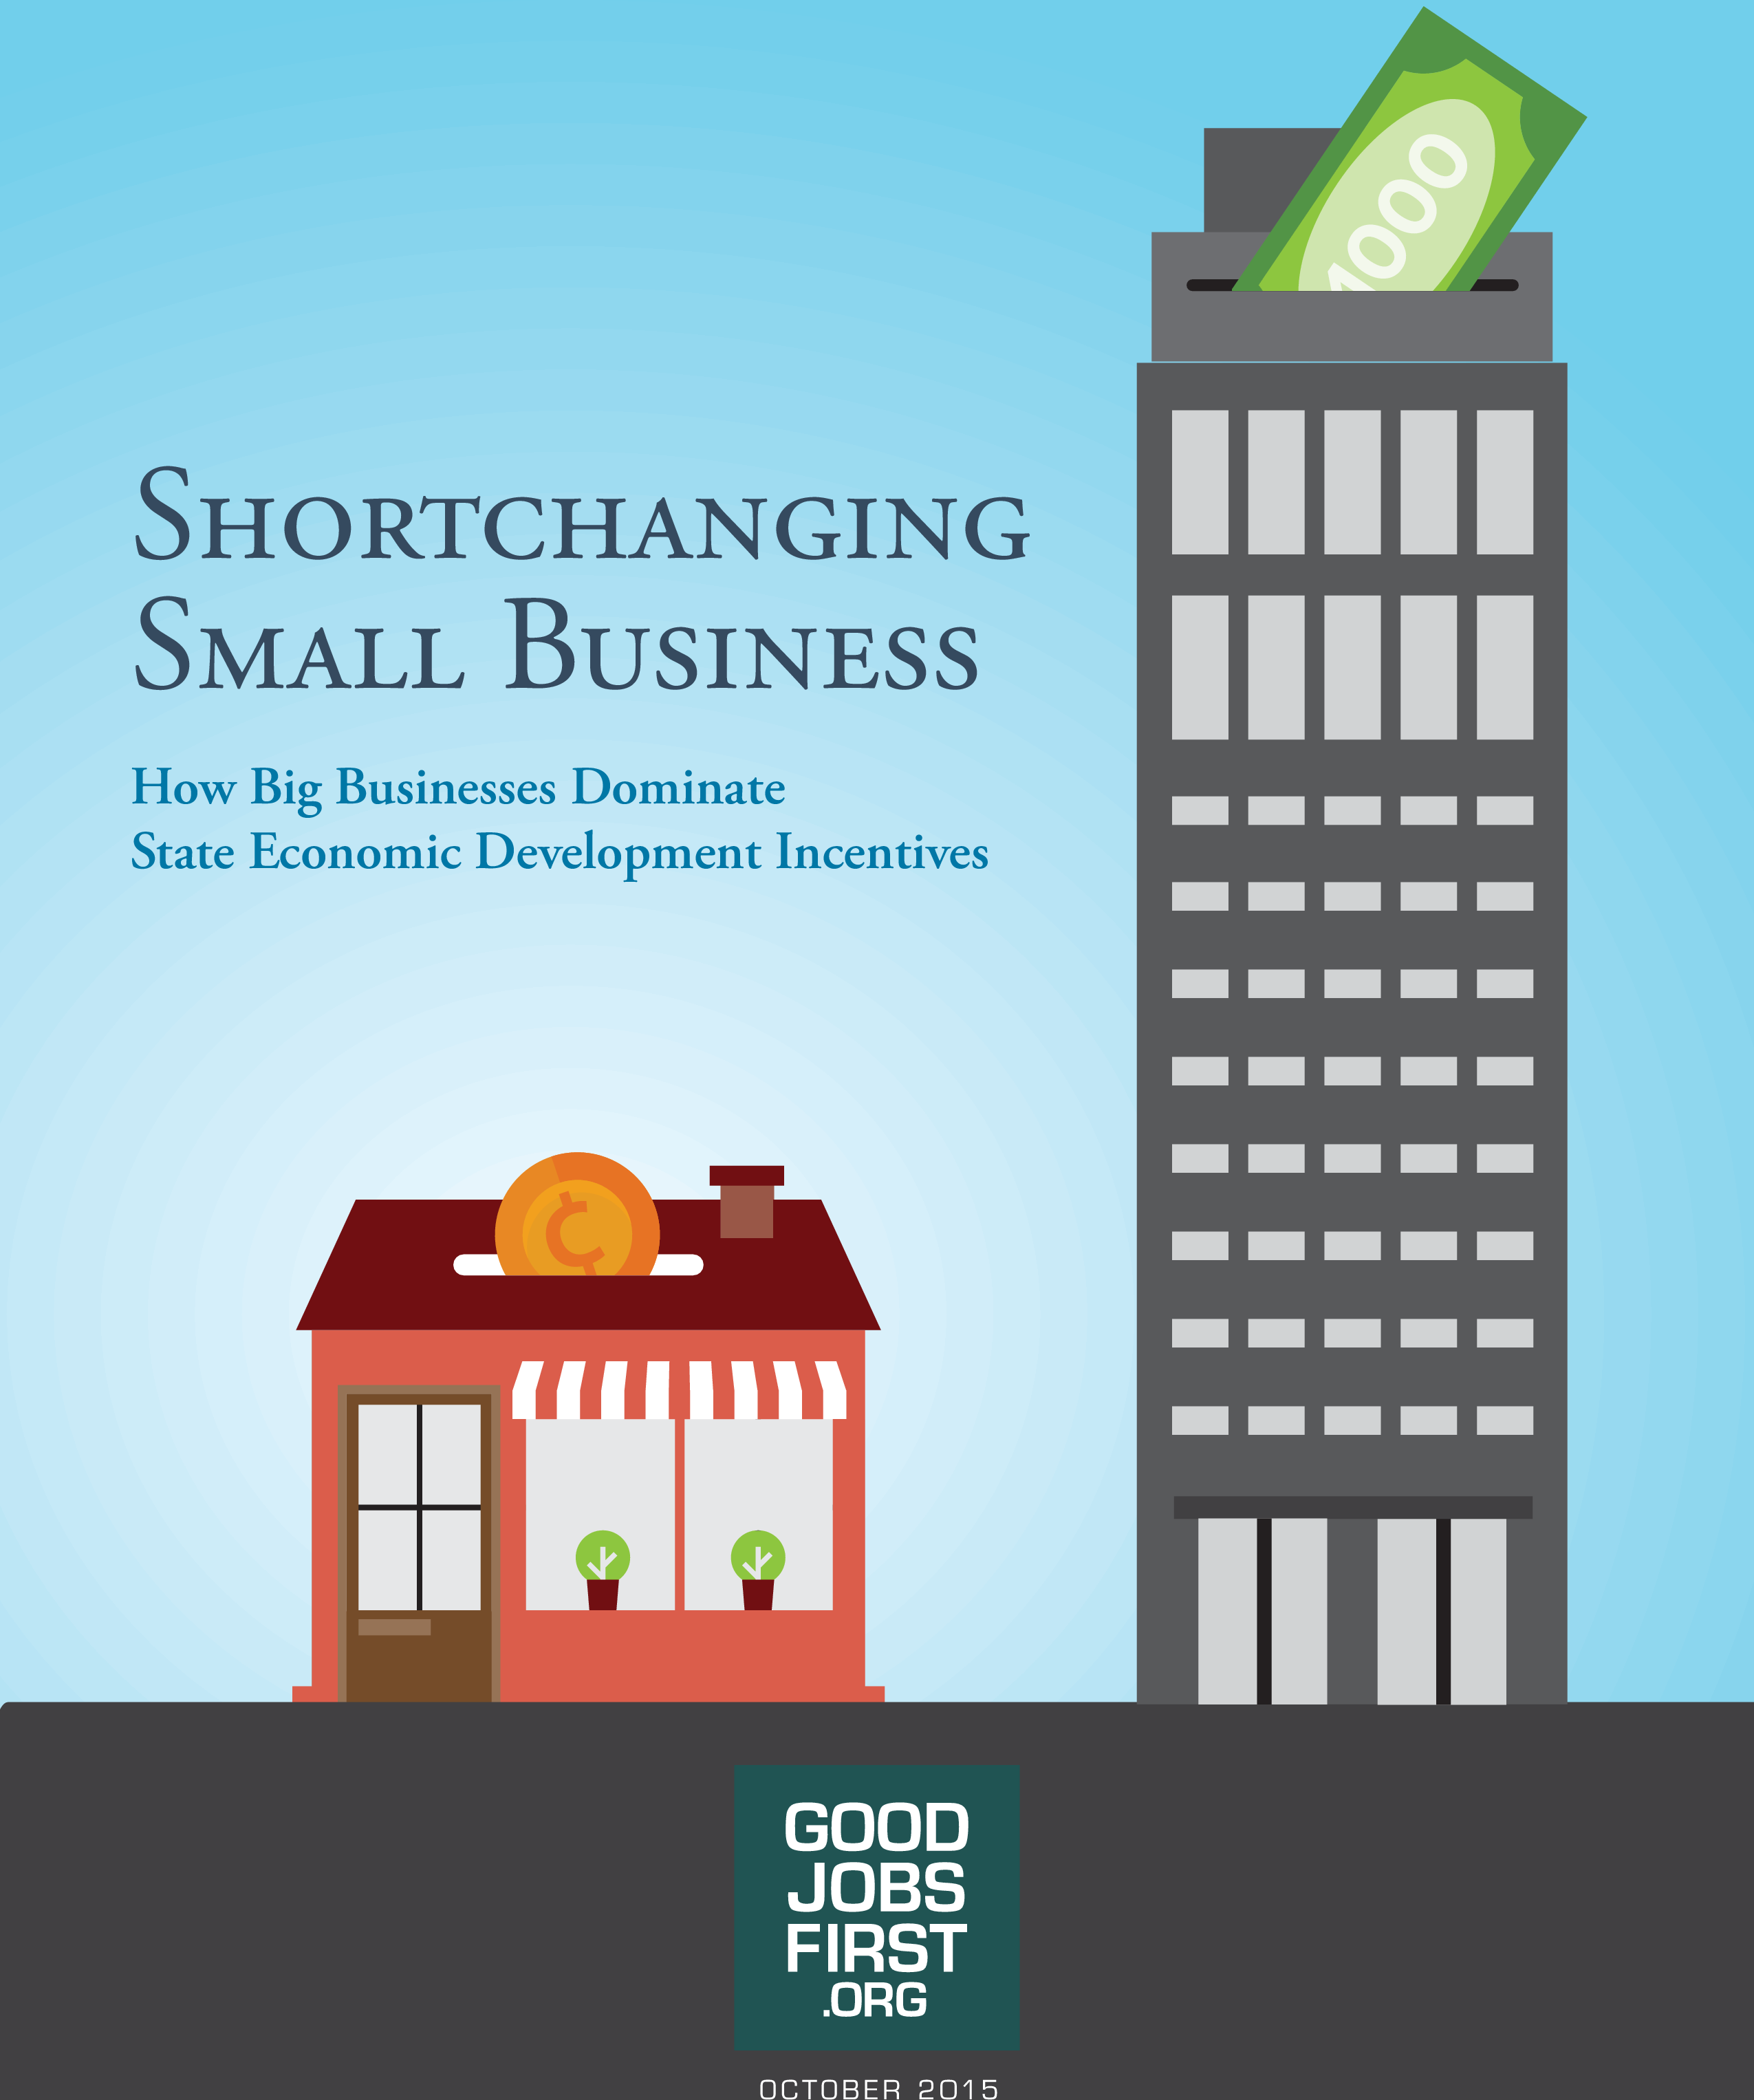 Shortchanging small business